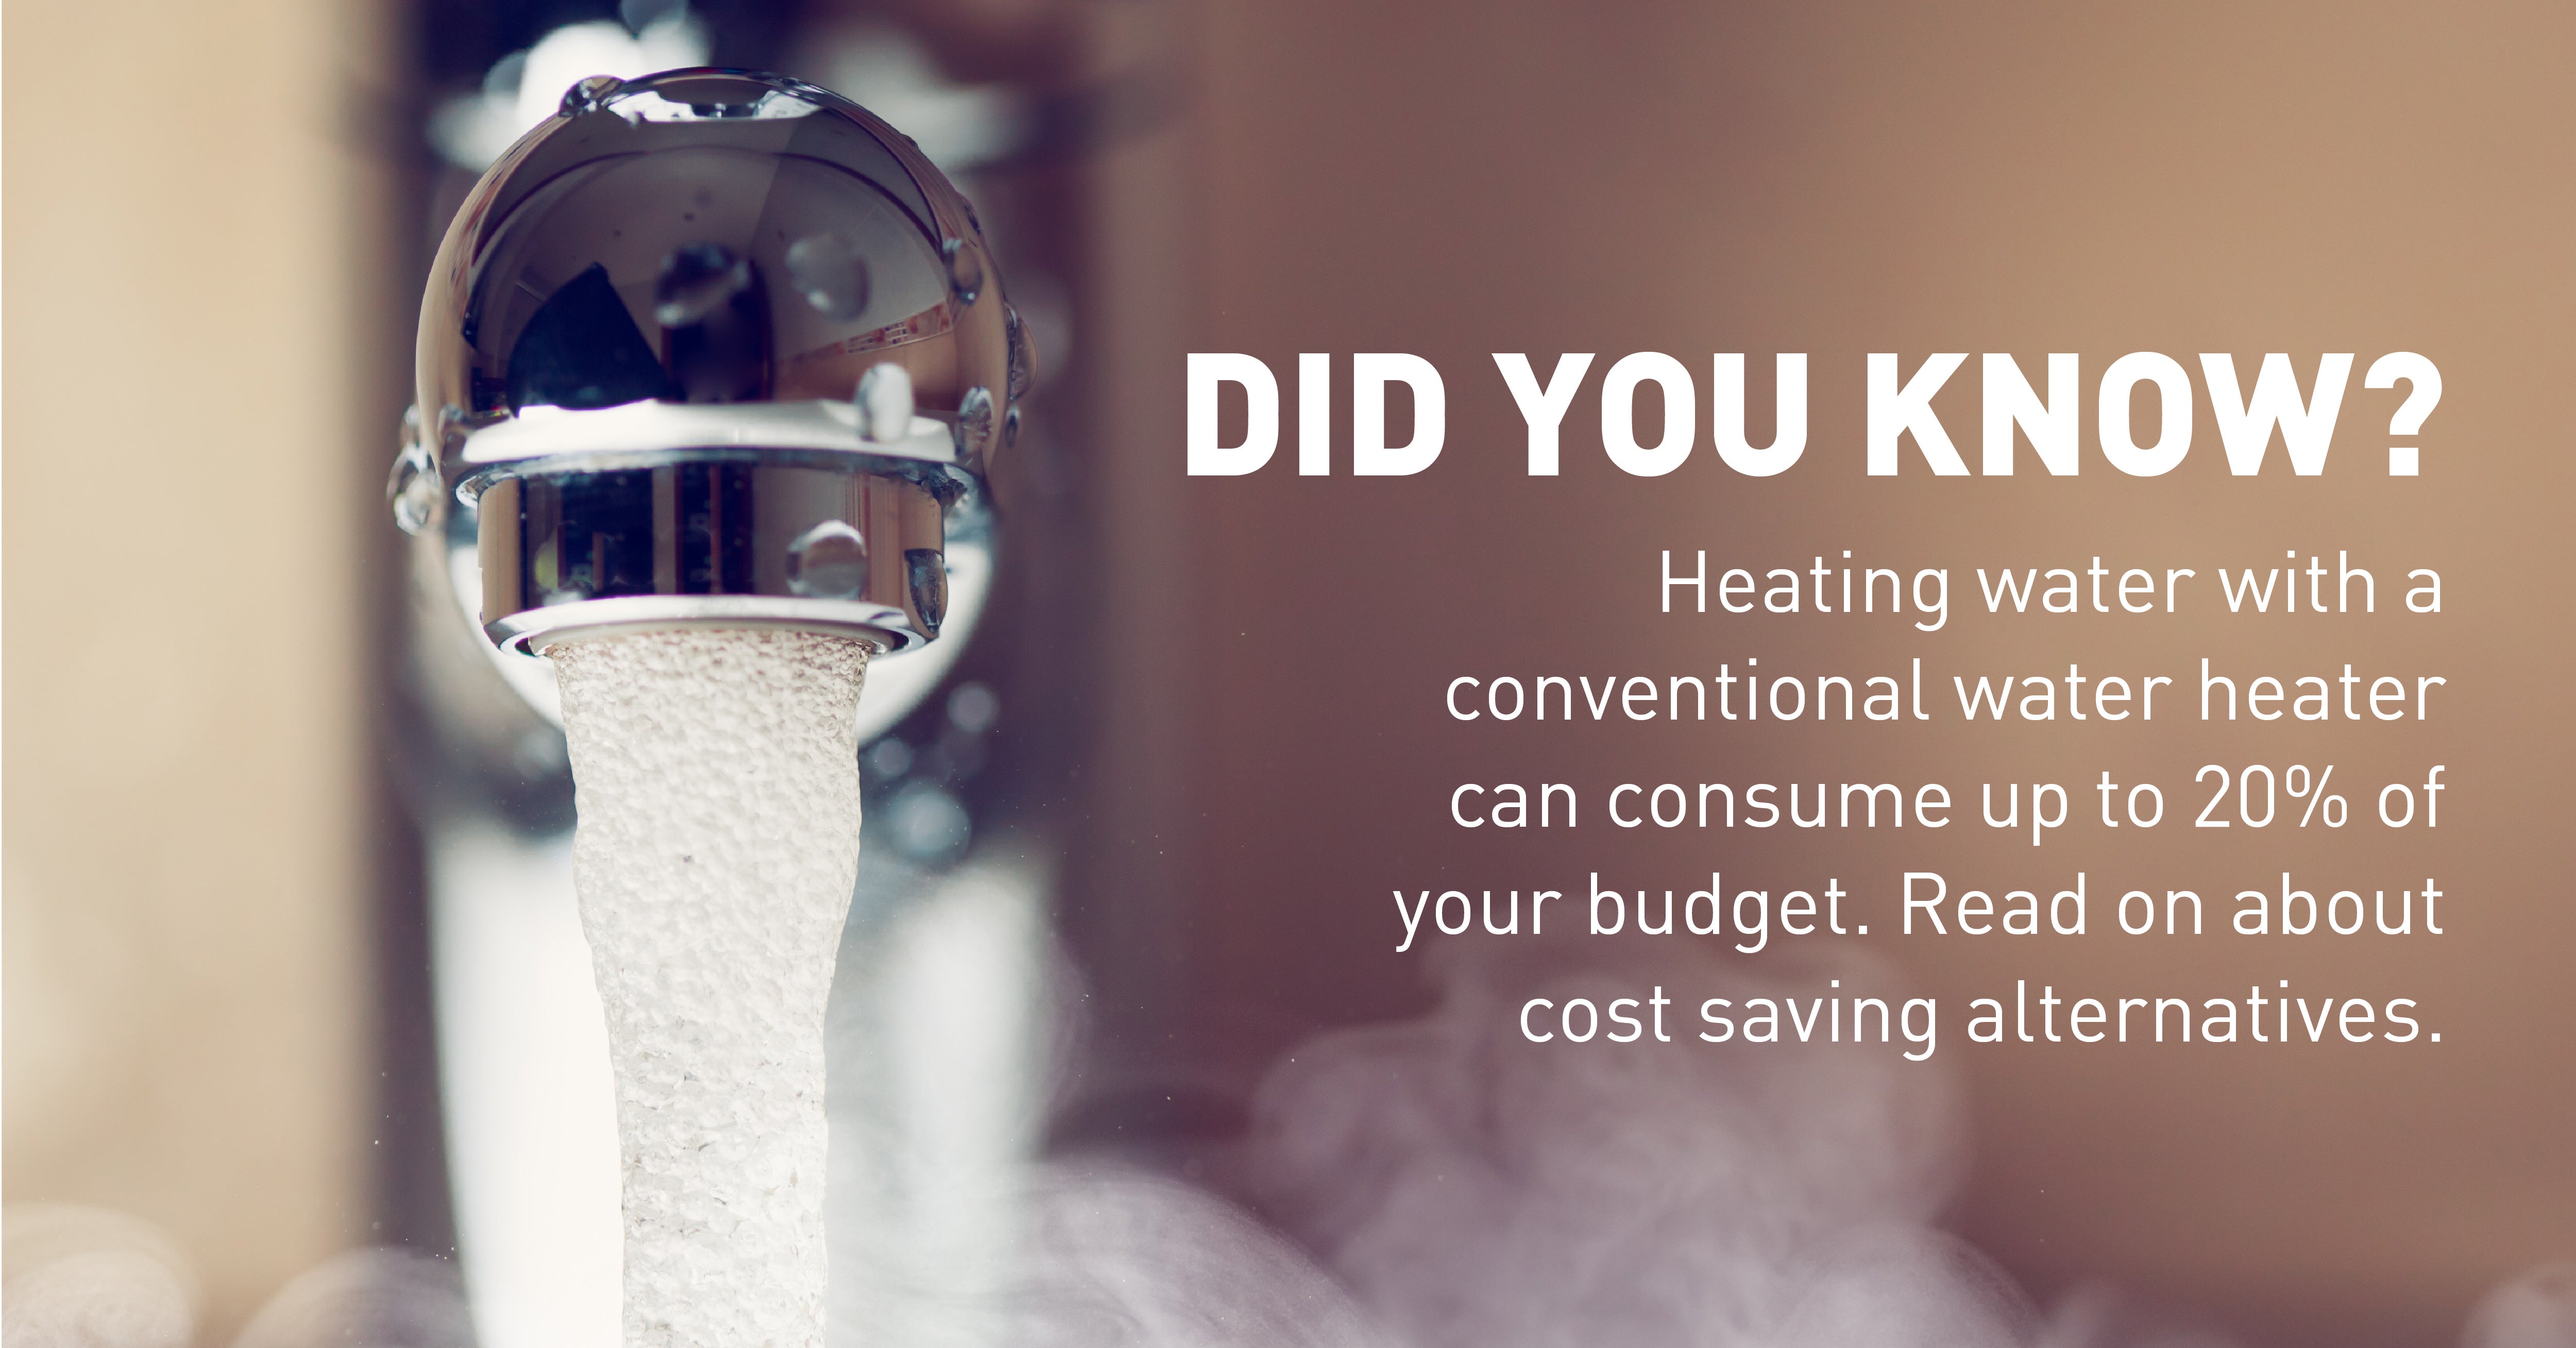 Switching to an energy saving water heater